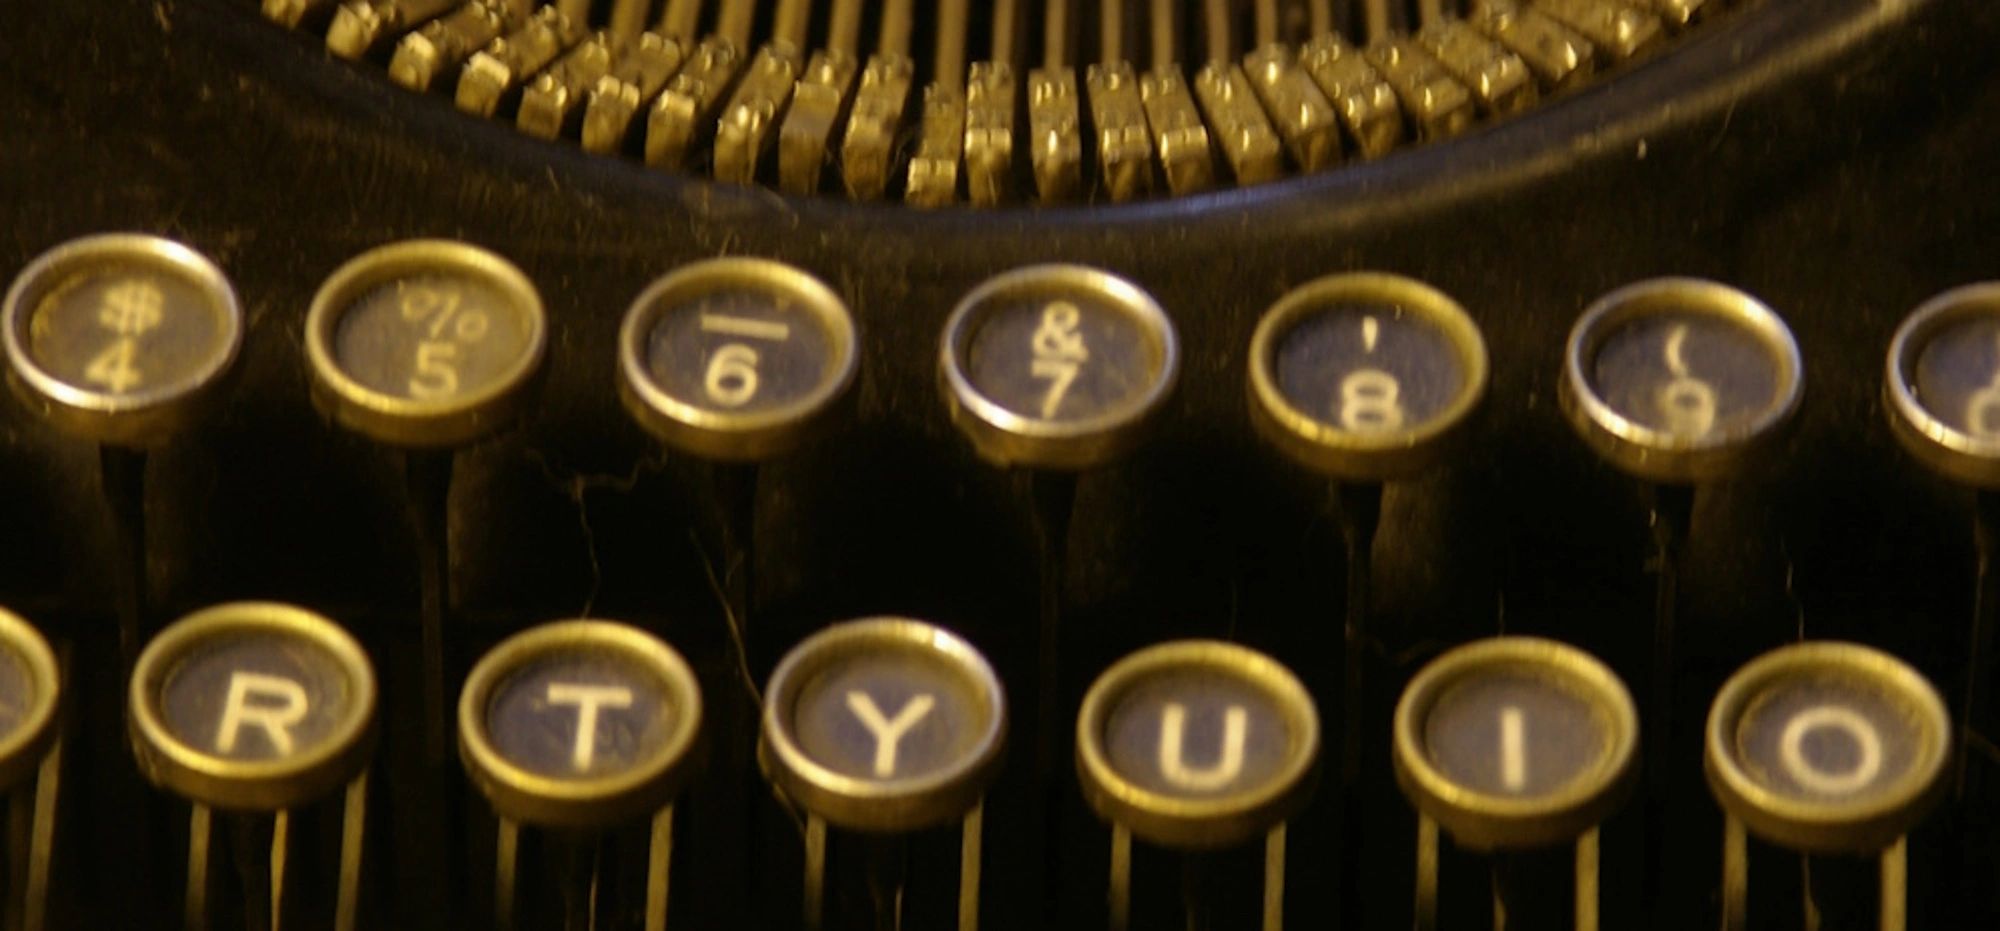 Old-fashioned typewriter keyboard. Closeup of selected area.